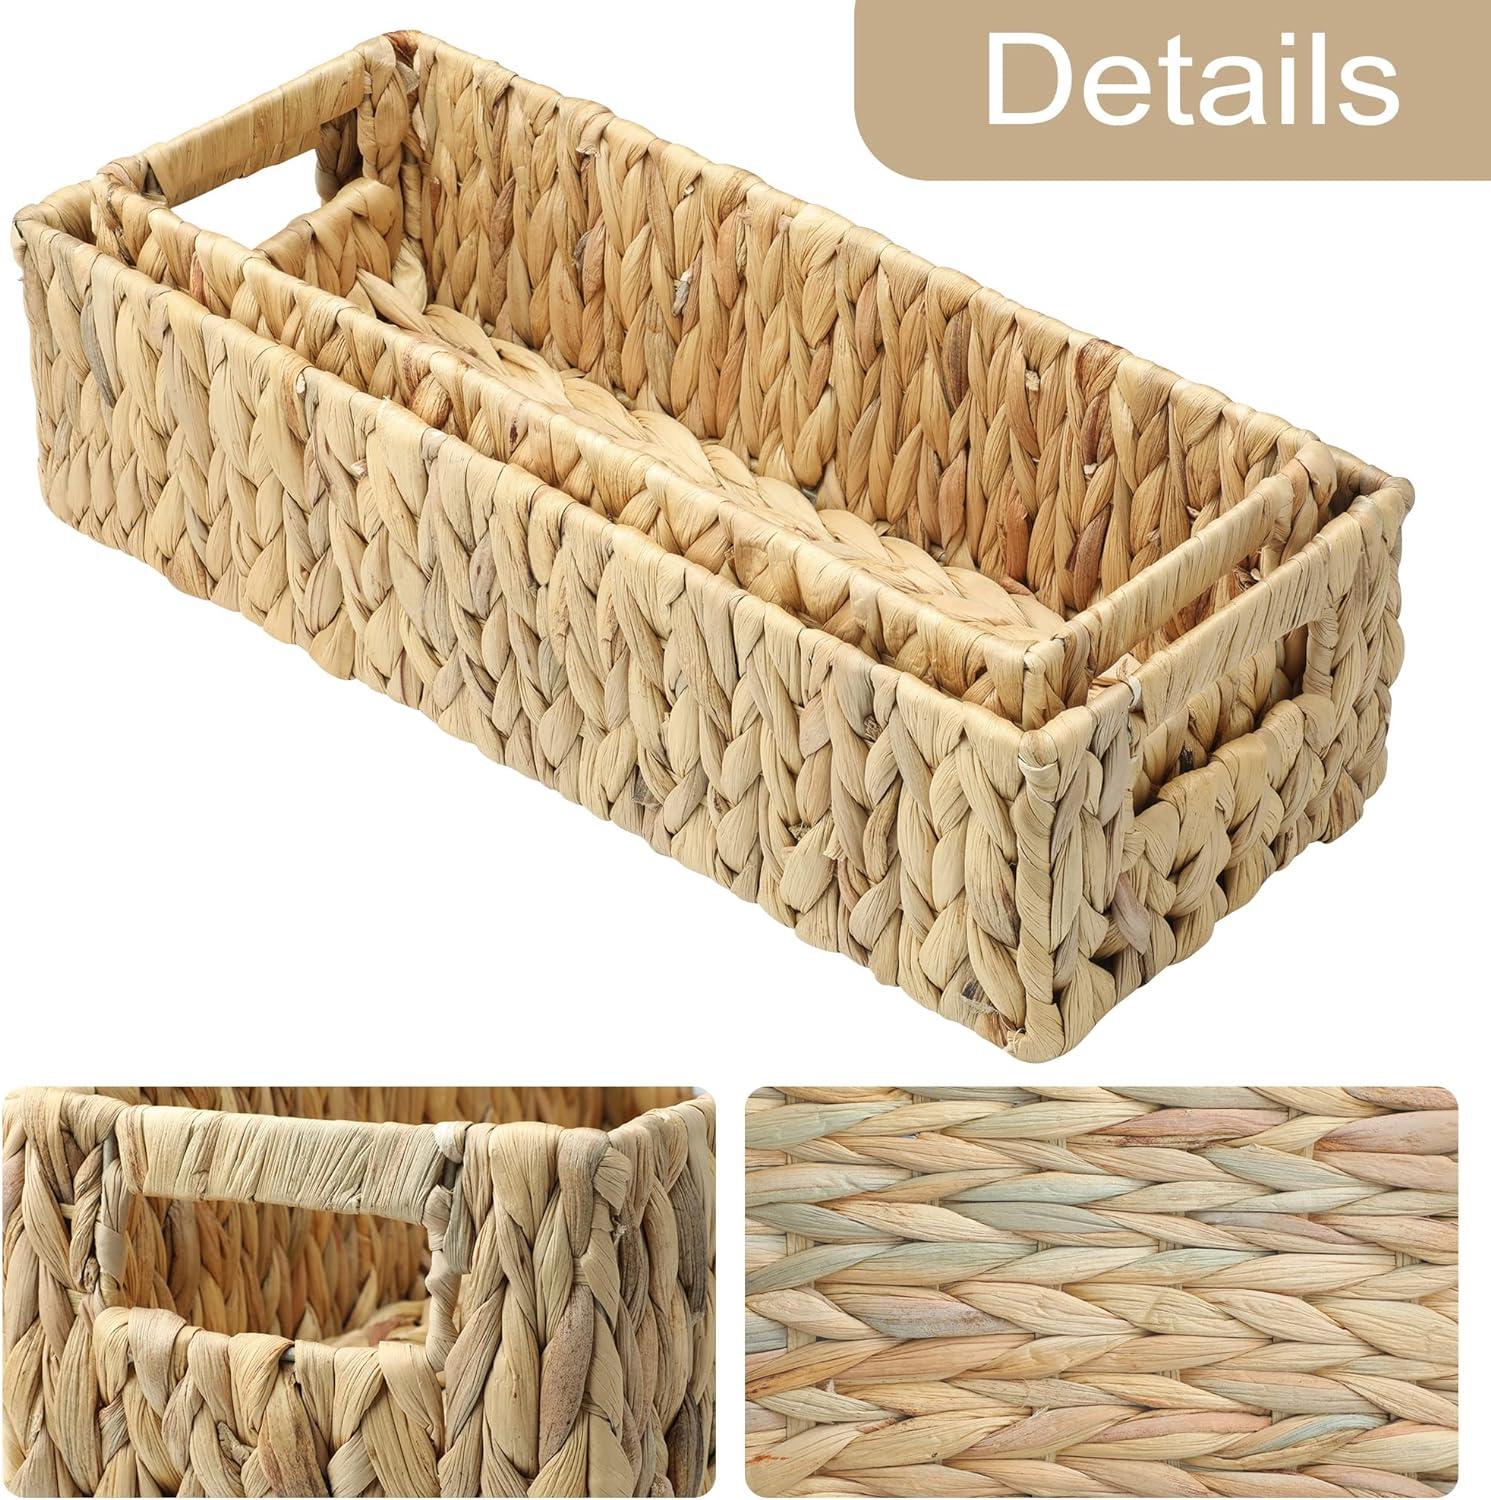 Wicker Baskets with Liner for Storage, 2 Pack Decorative Woven Storage  Baskets for Organizing, Toilet Paper Basket Storage, Bathroom Storage Bins